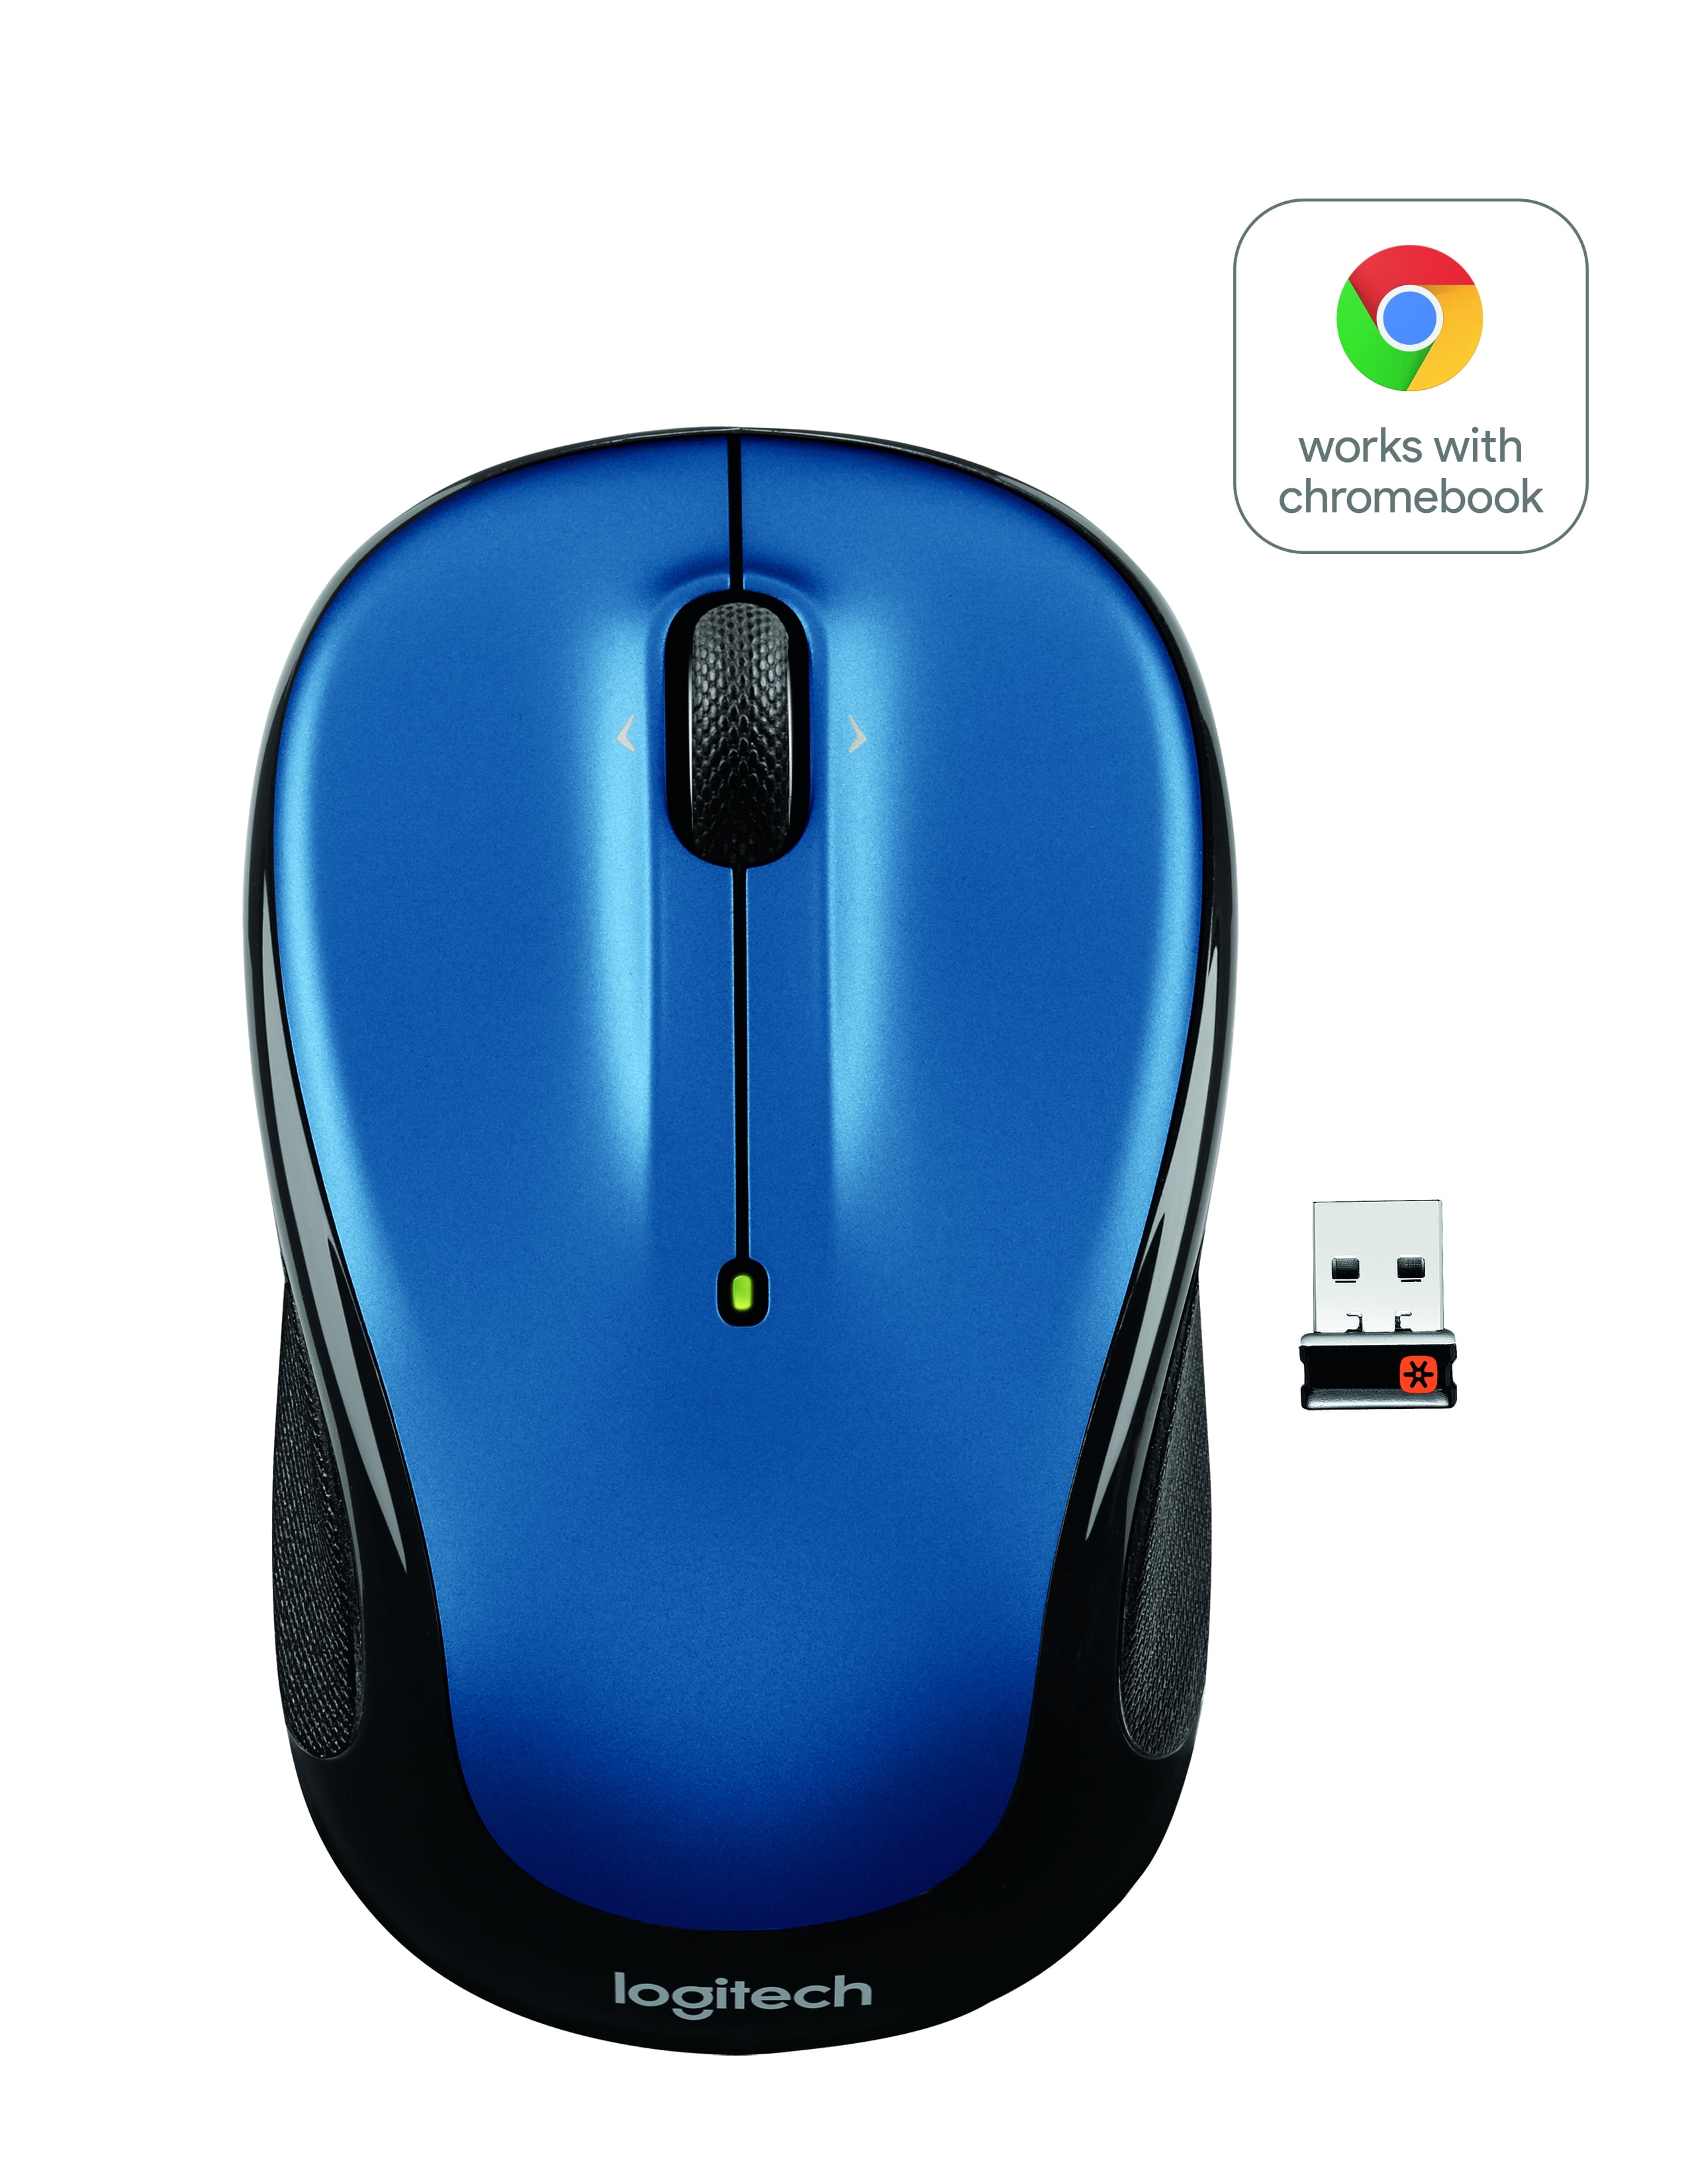 Logitech M325 3 Buttons USB Wireless 1000 DPI 2.4GHz Unifying Optical Mouse Mice 